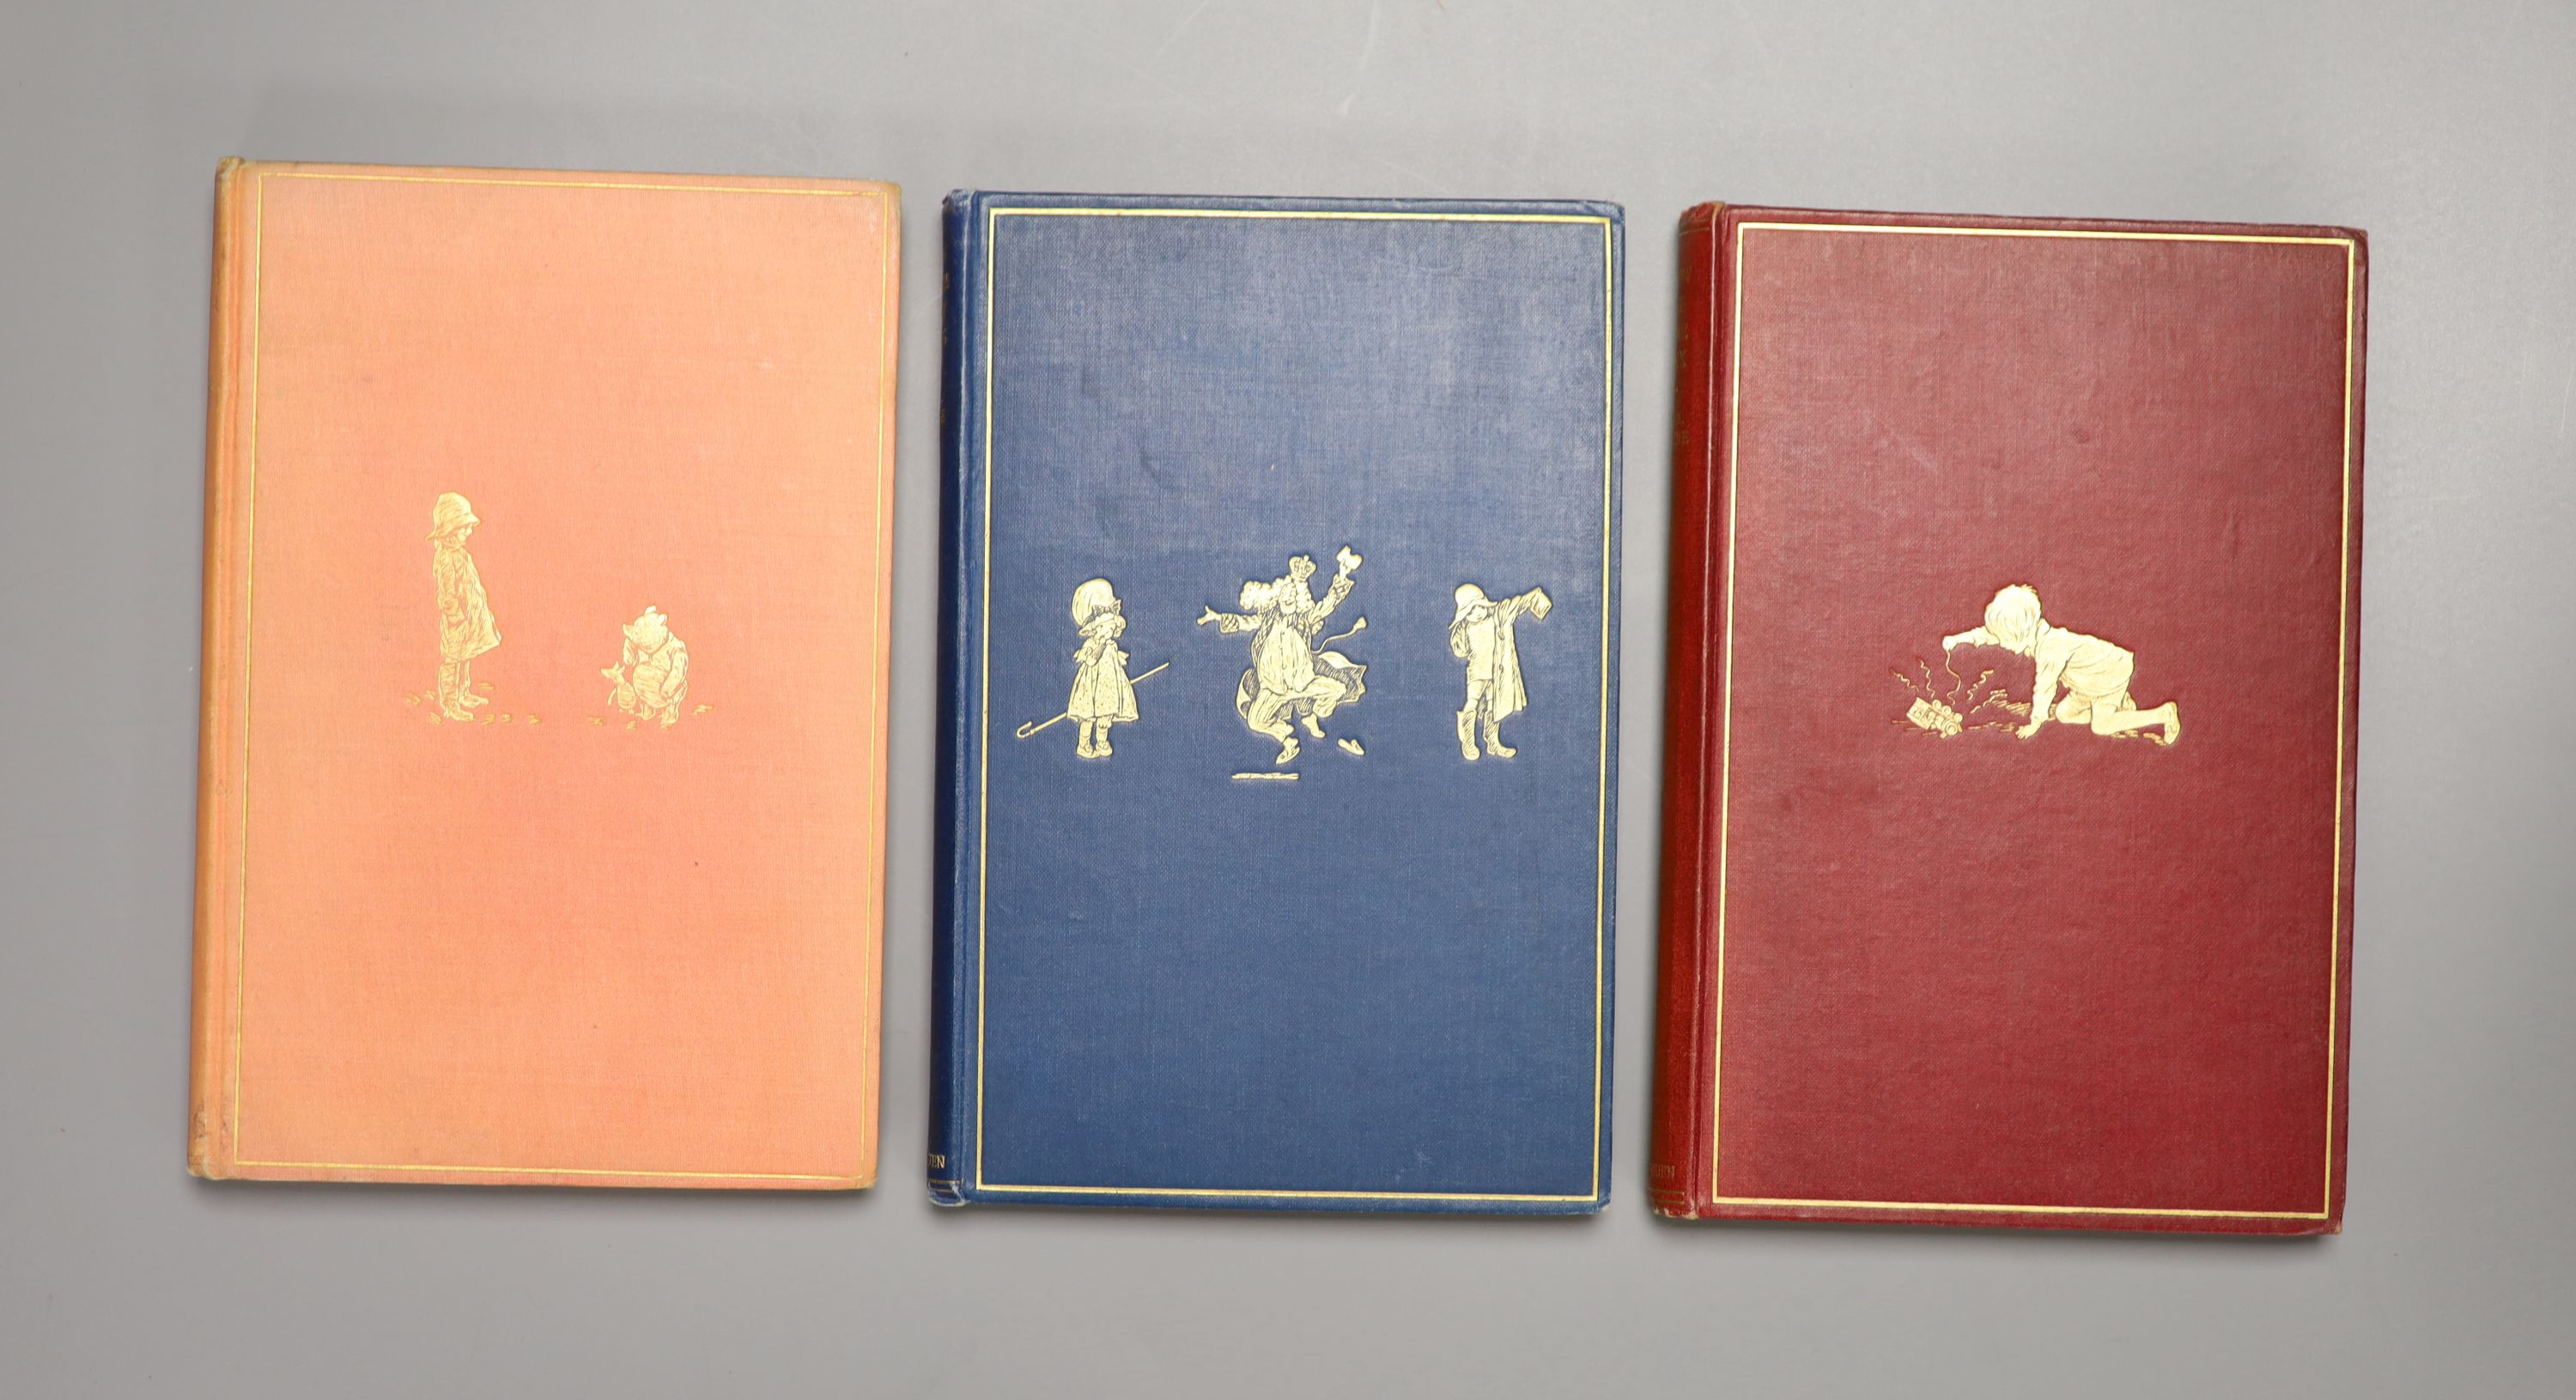 Milne, Alan Alexander - 3 works, all illustrated by Ernest H. Shepard - Now We Are Six, 1st edition, 8vo, original cloth gilt, faded ink ownership inscription to front fly leaf, London, 1927; The House at Pooh Corner, 1s